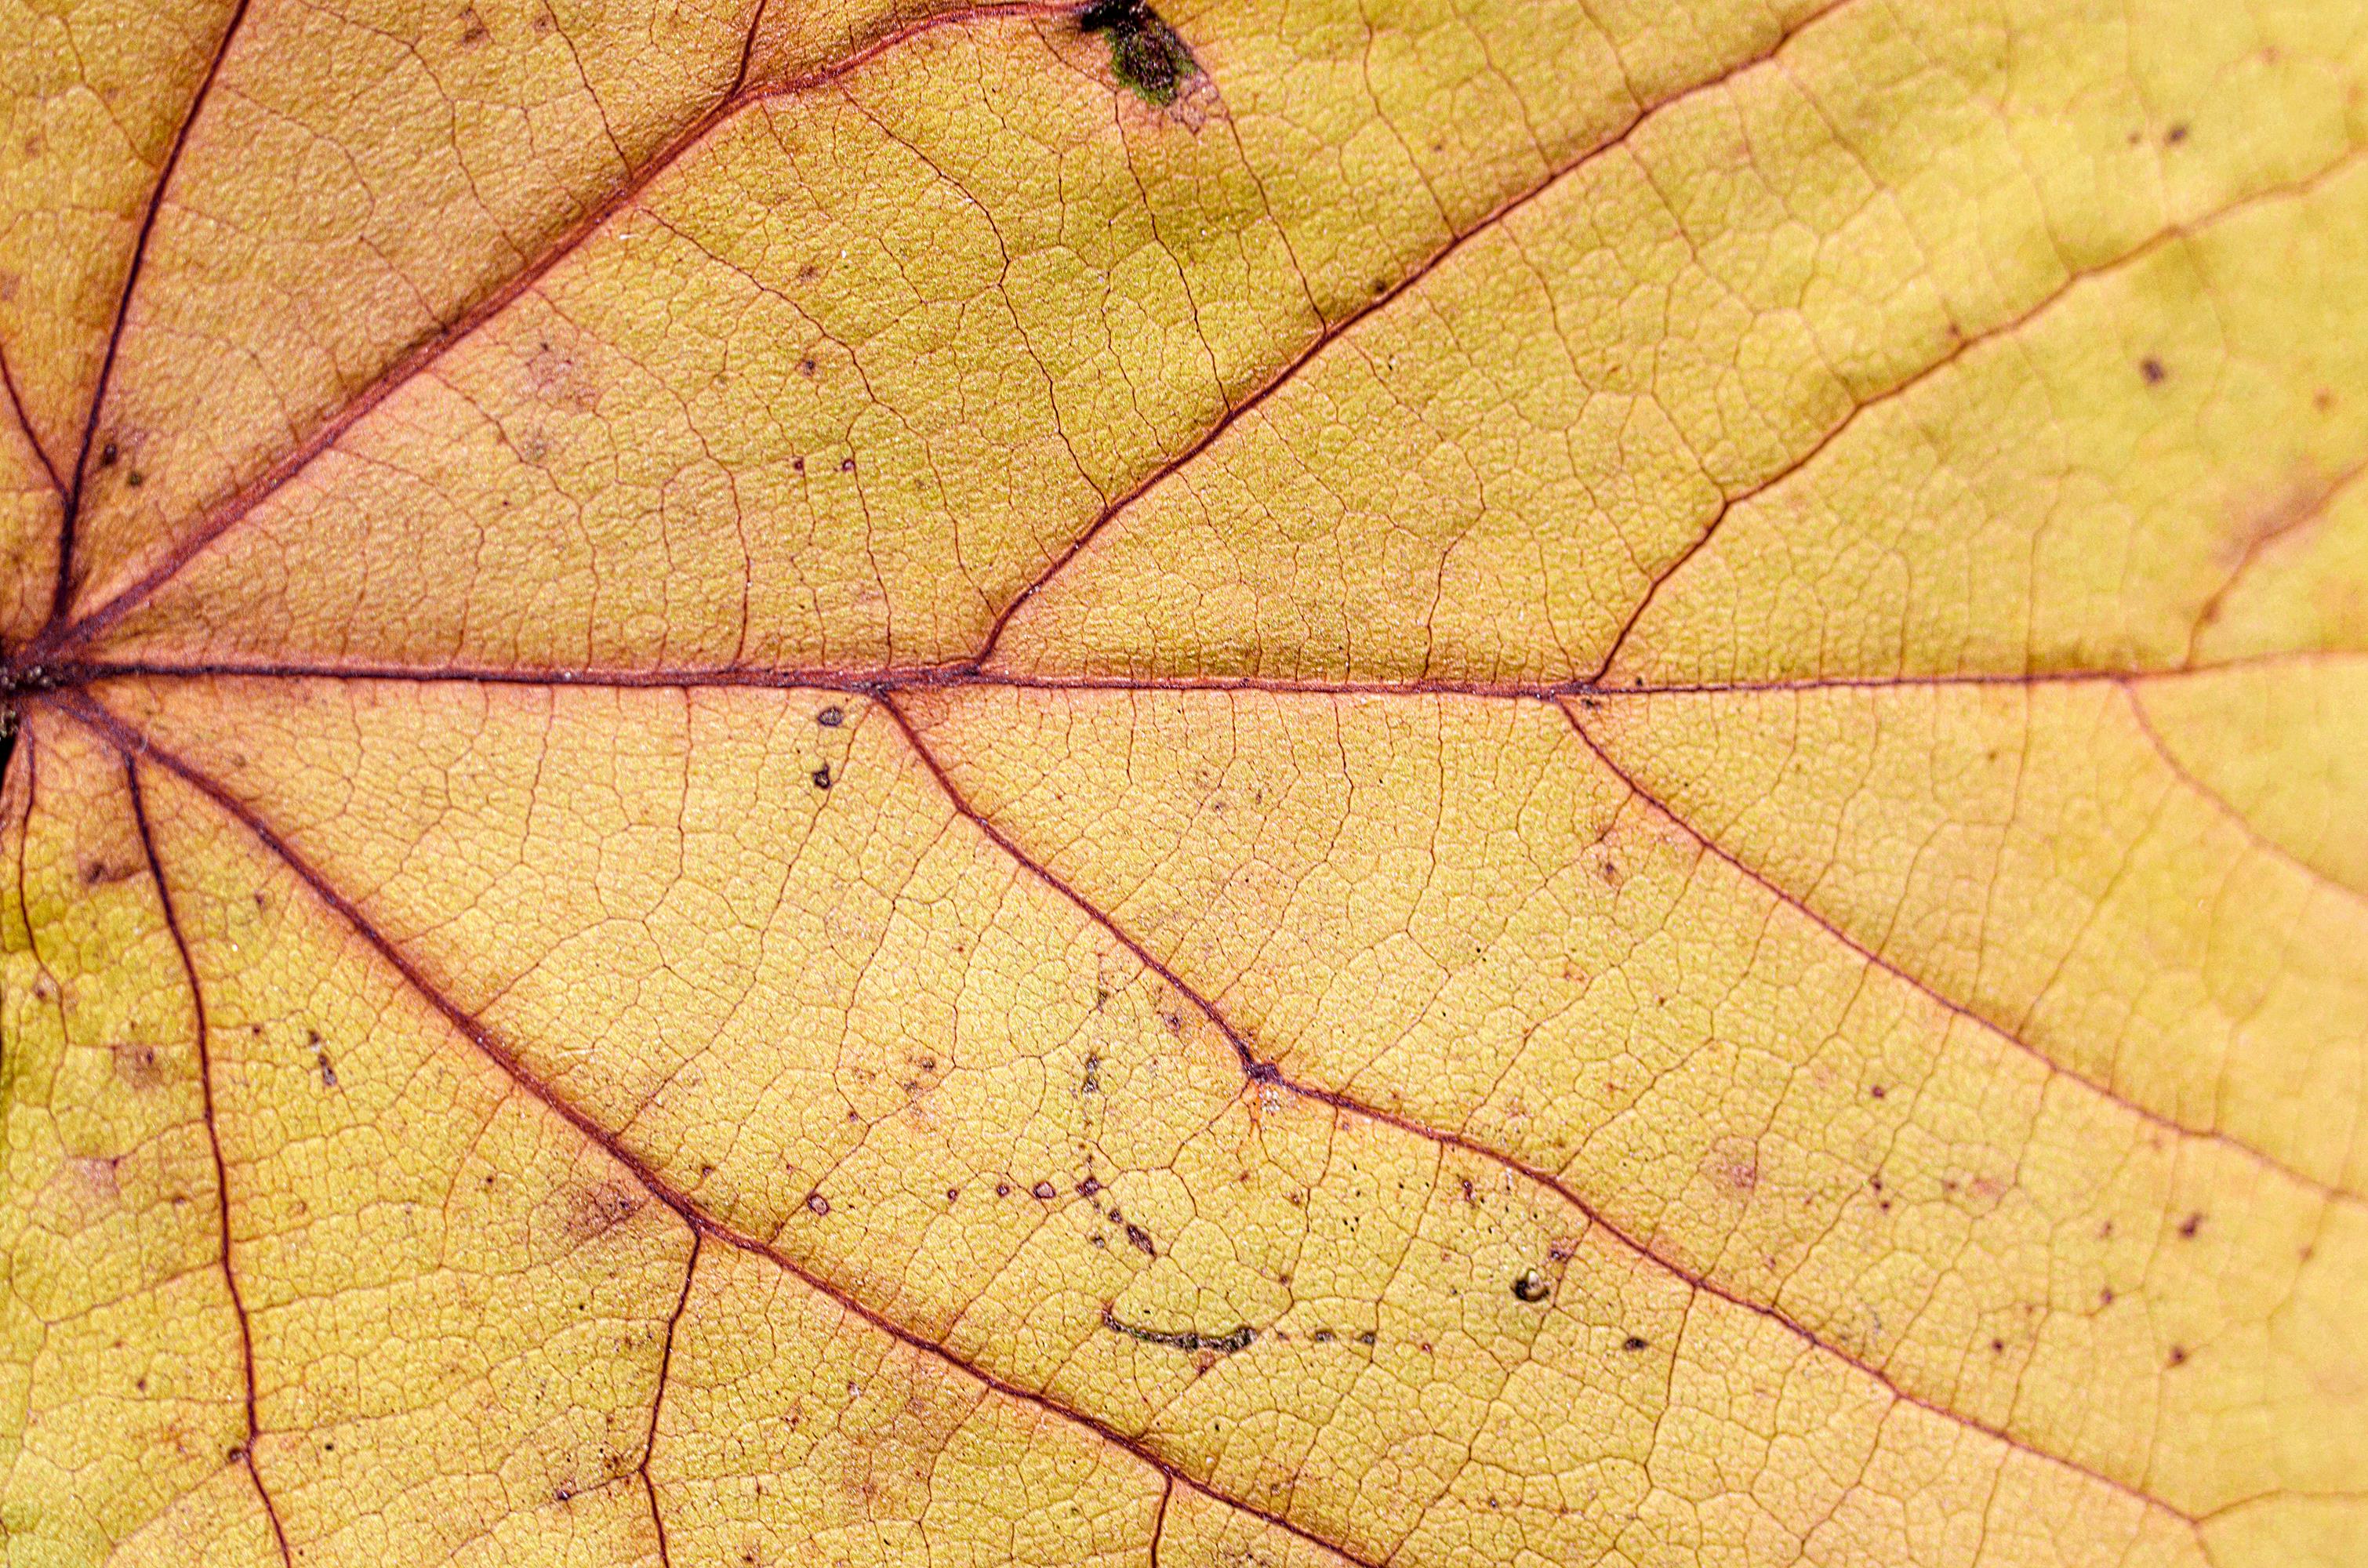 File:Red veins on a yellow leaf.jpg - Wikimedia Commons